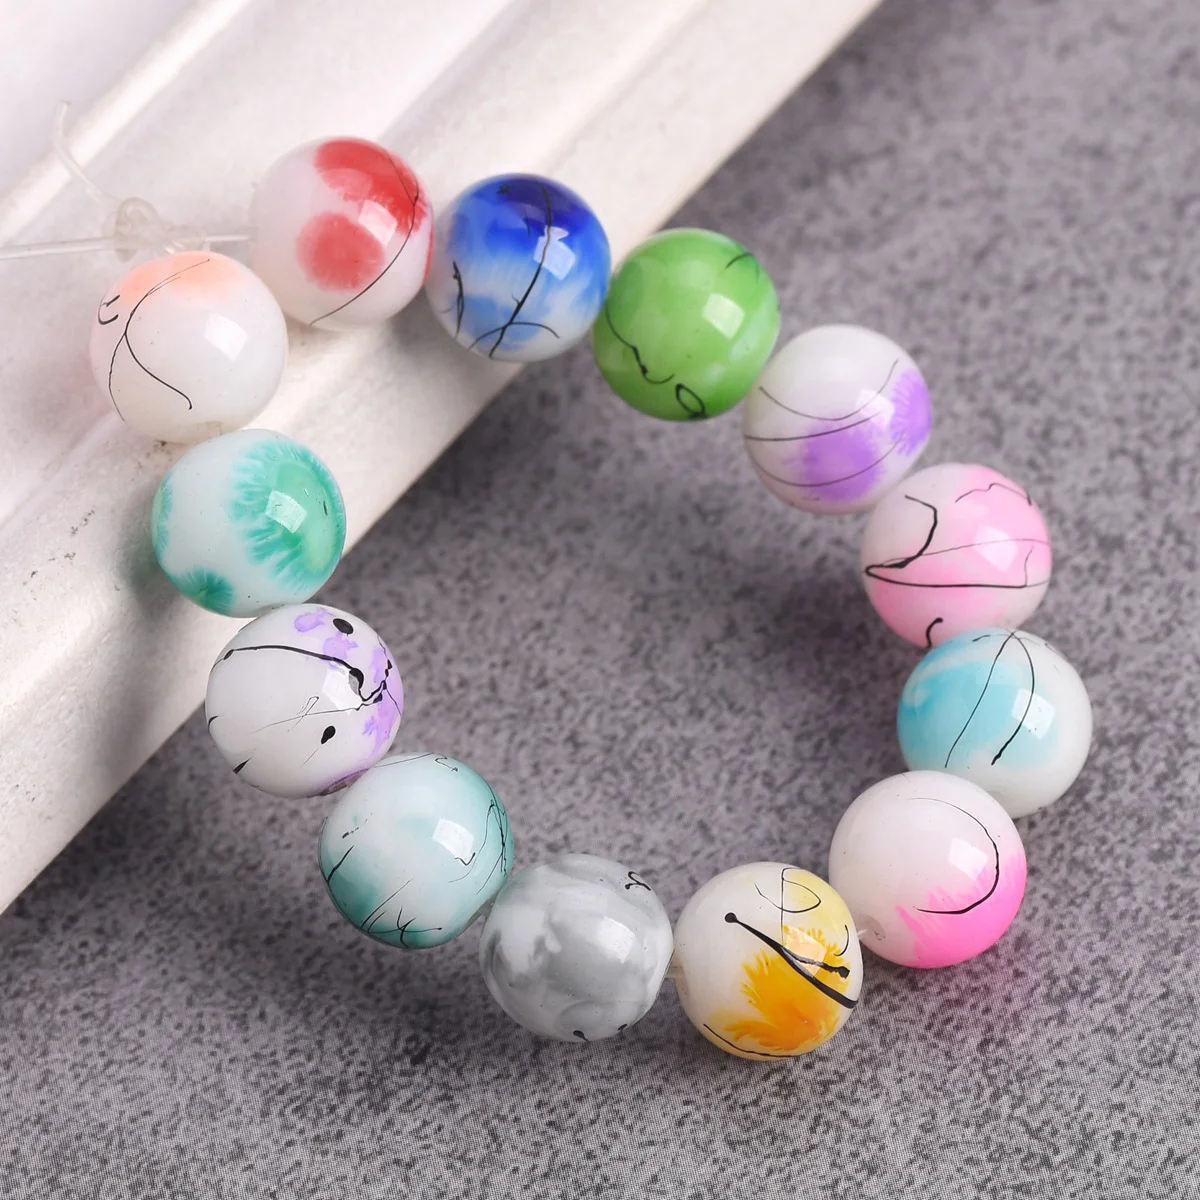 10pcs Round 10mm 12mm Scrawl Spots Pattern Opaque Glass Loose Beads Lot for Jewelry Making DIY Crafts